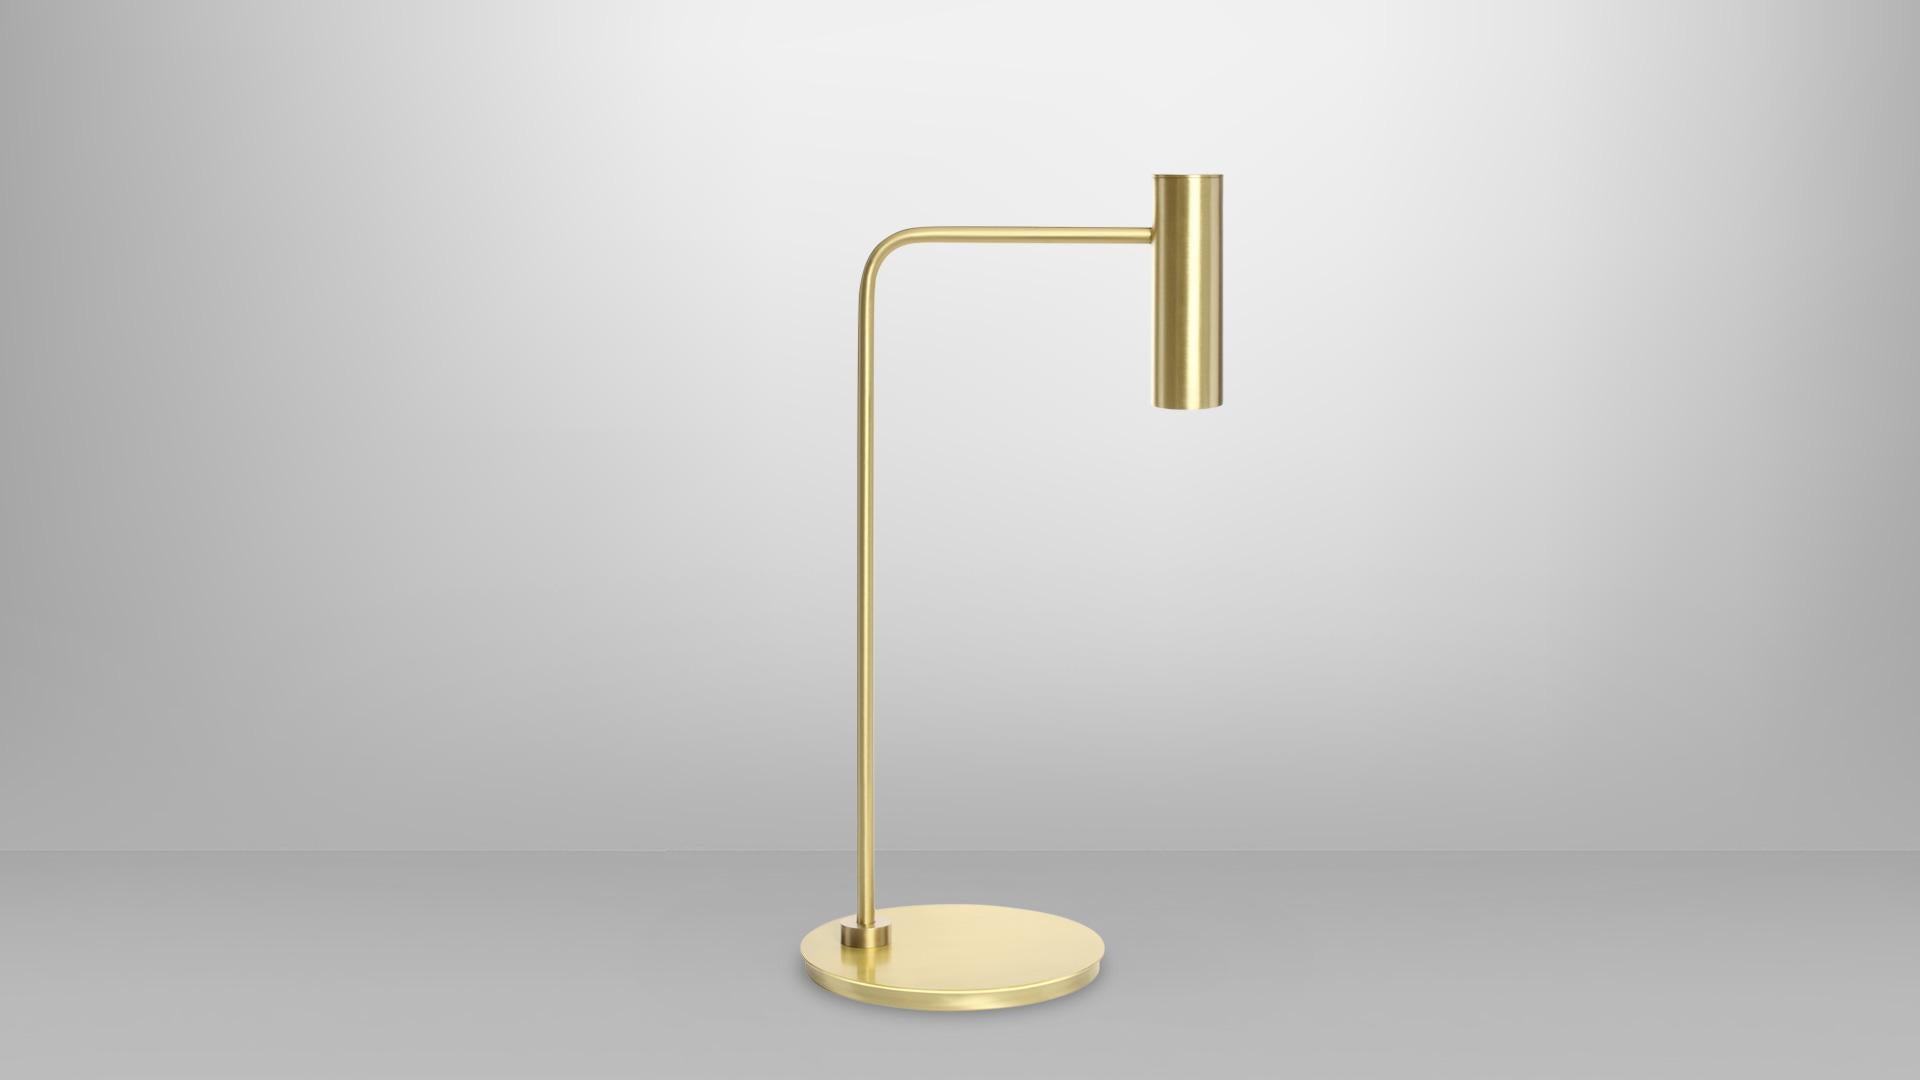 Heron table lamp by CTO Lighting
Materials: satin brass with movable head.
Also available in bronze with movable head.
Dimensions: W 26 x D 37 x H 69 cm 

All our lamps can be wired according to each country. If sold to the USA it will be wired